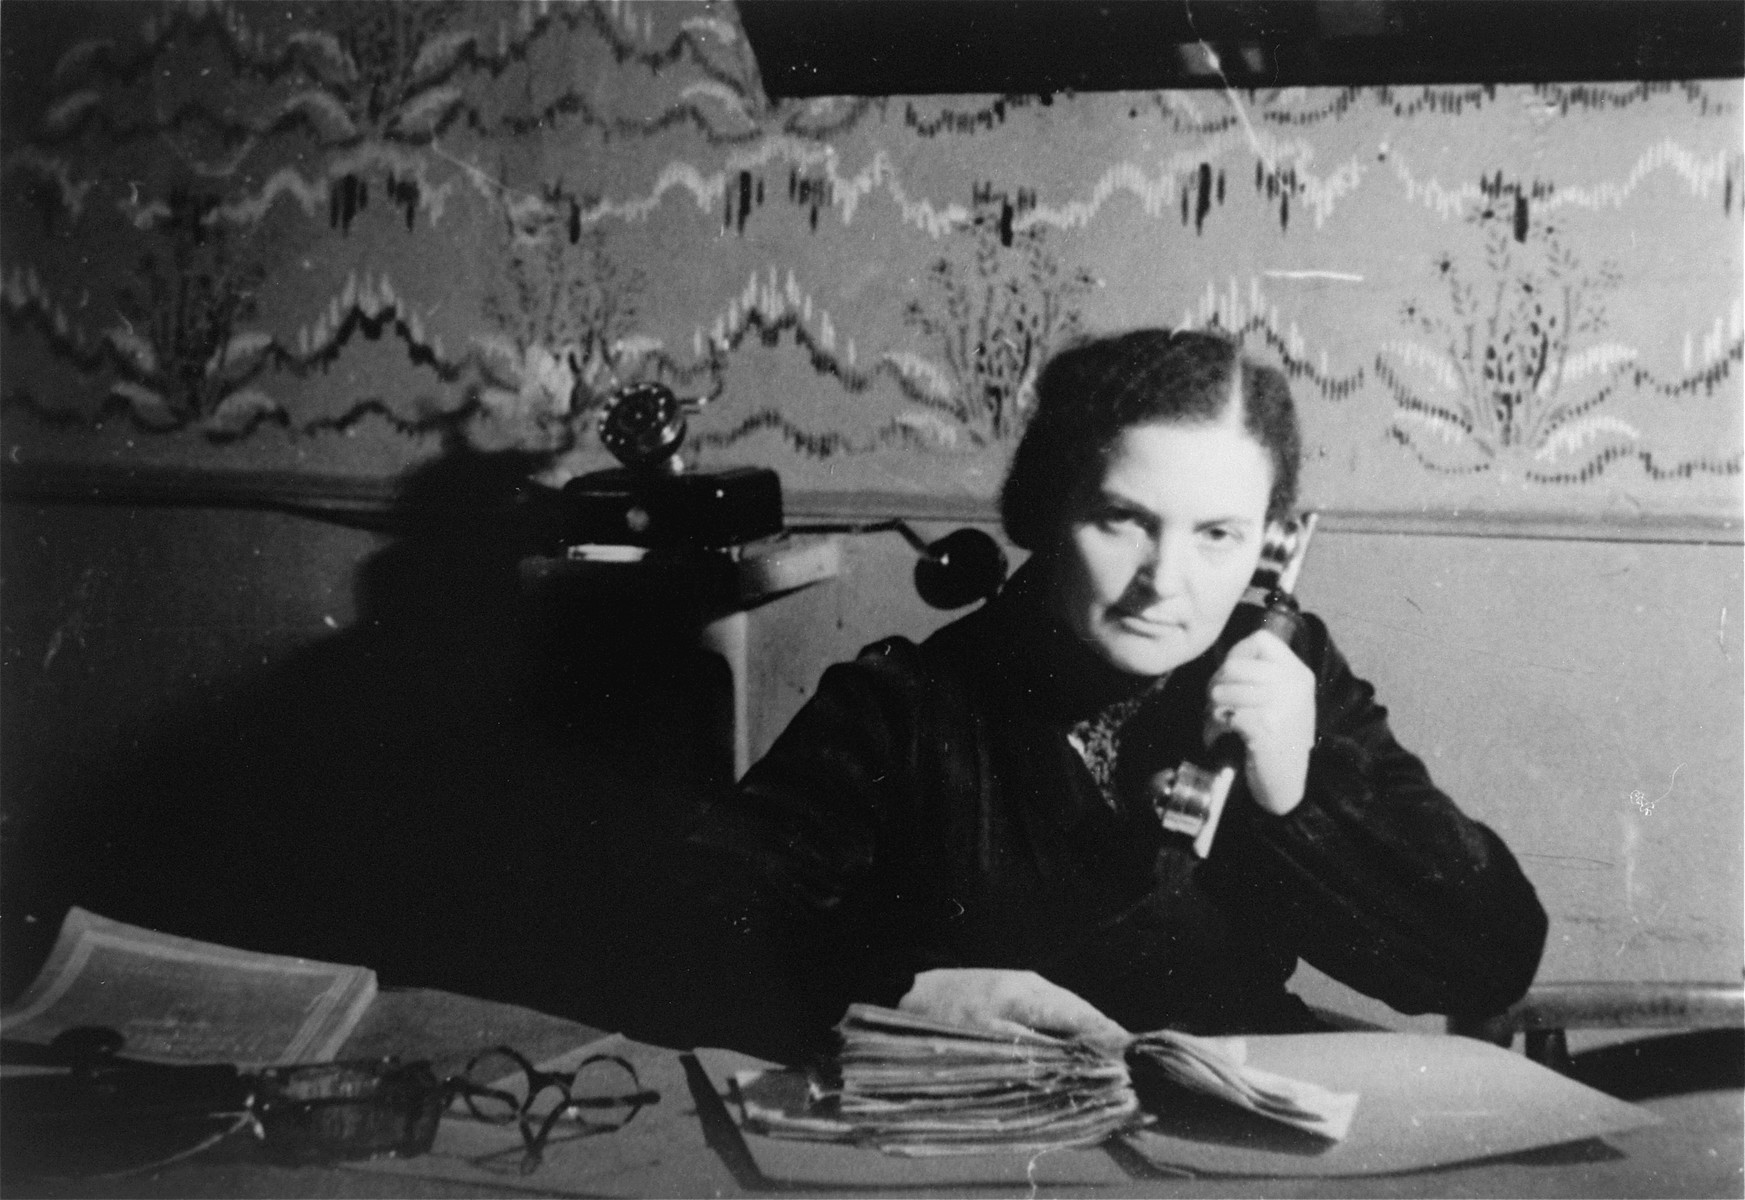 A female member of the ghetto administration sits at a desk in the office of the Judenrat in the Kielce ghetto.

This photo was one the images included in an official album prepared by the Judenrat of the Kielce ghetto in 1942.